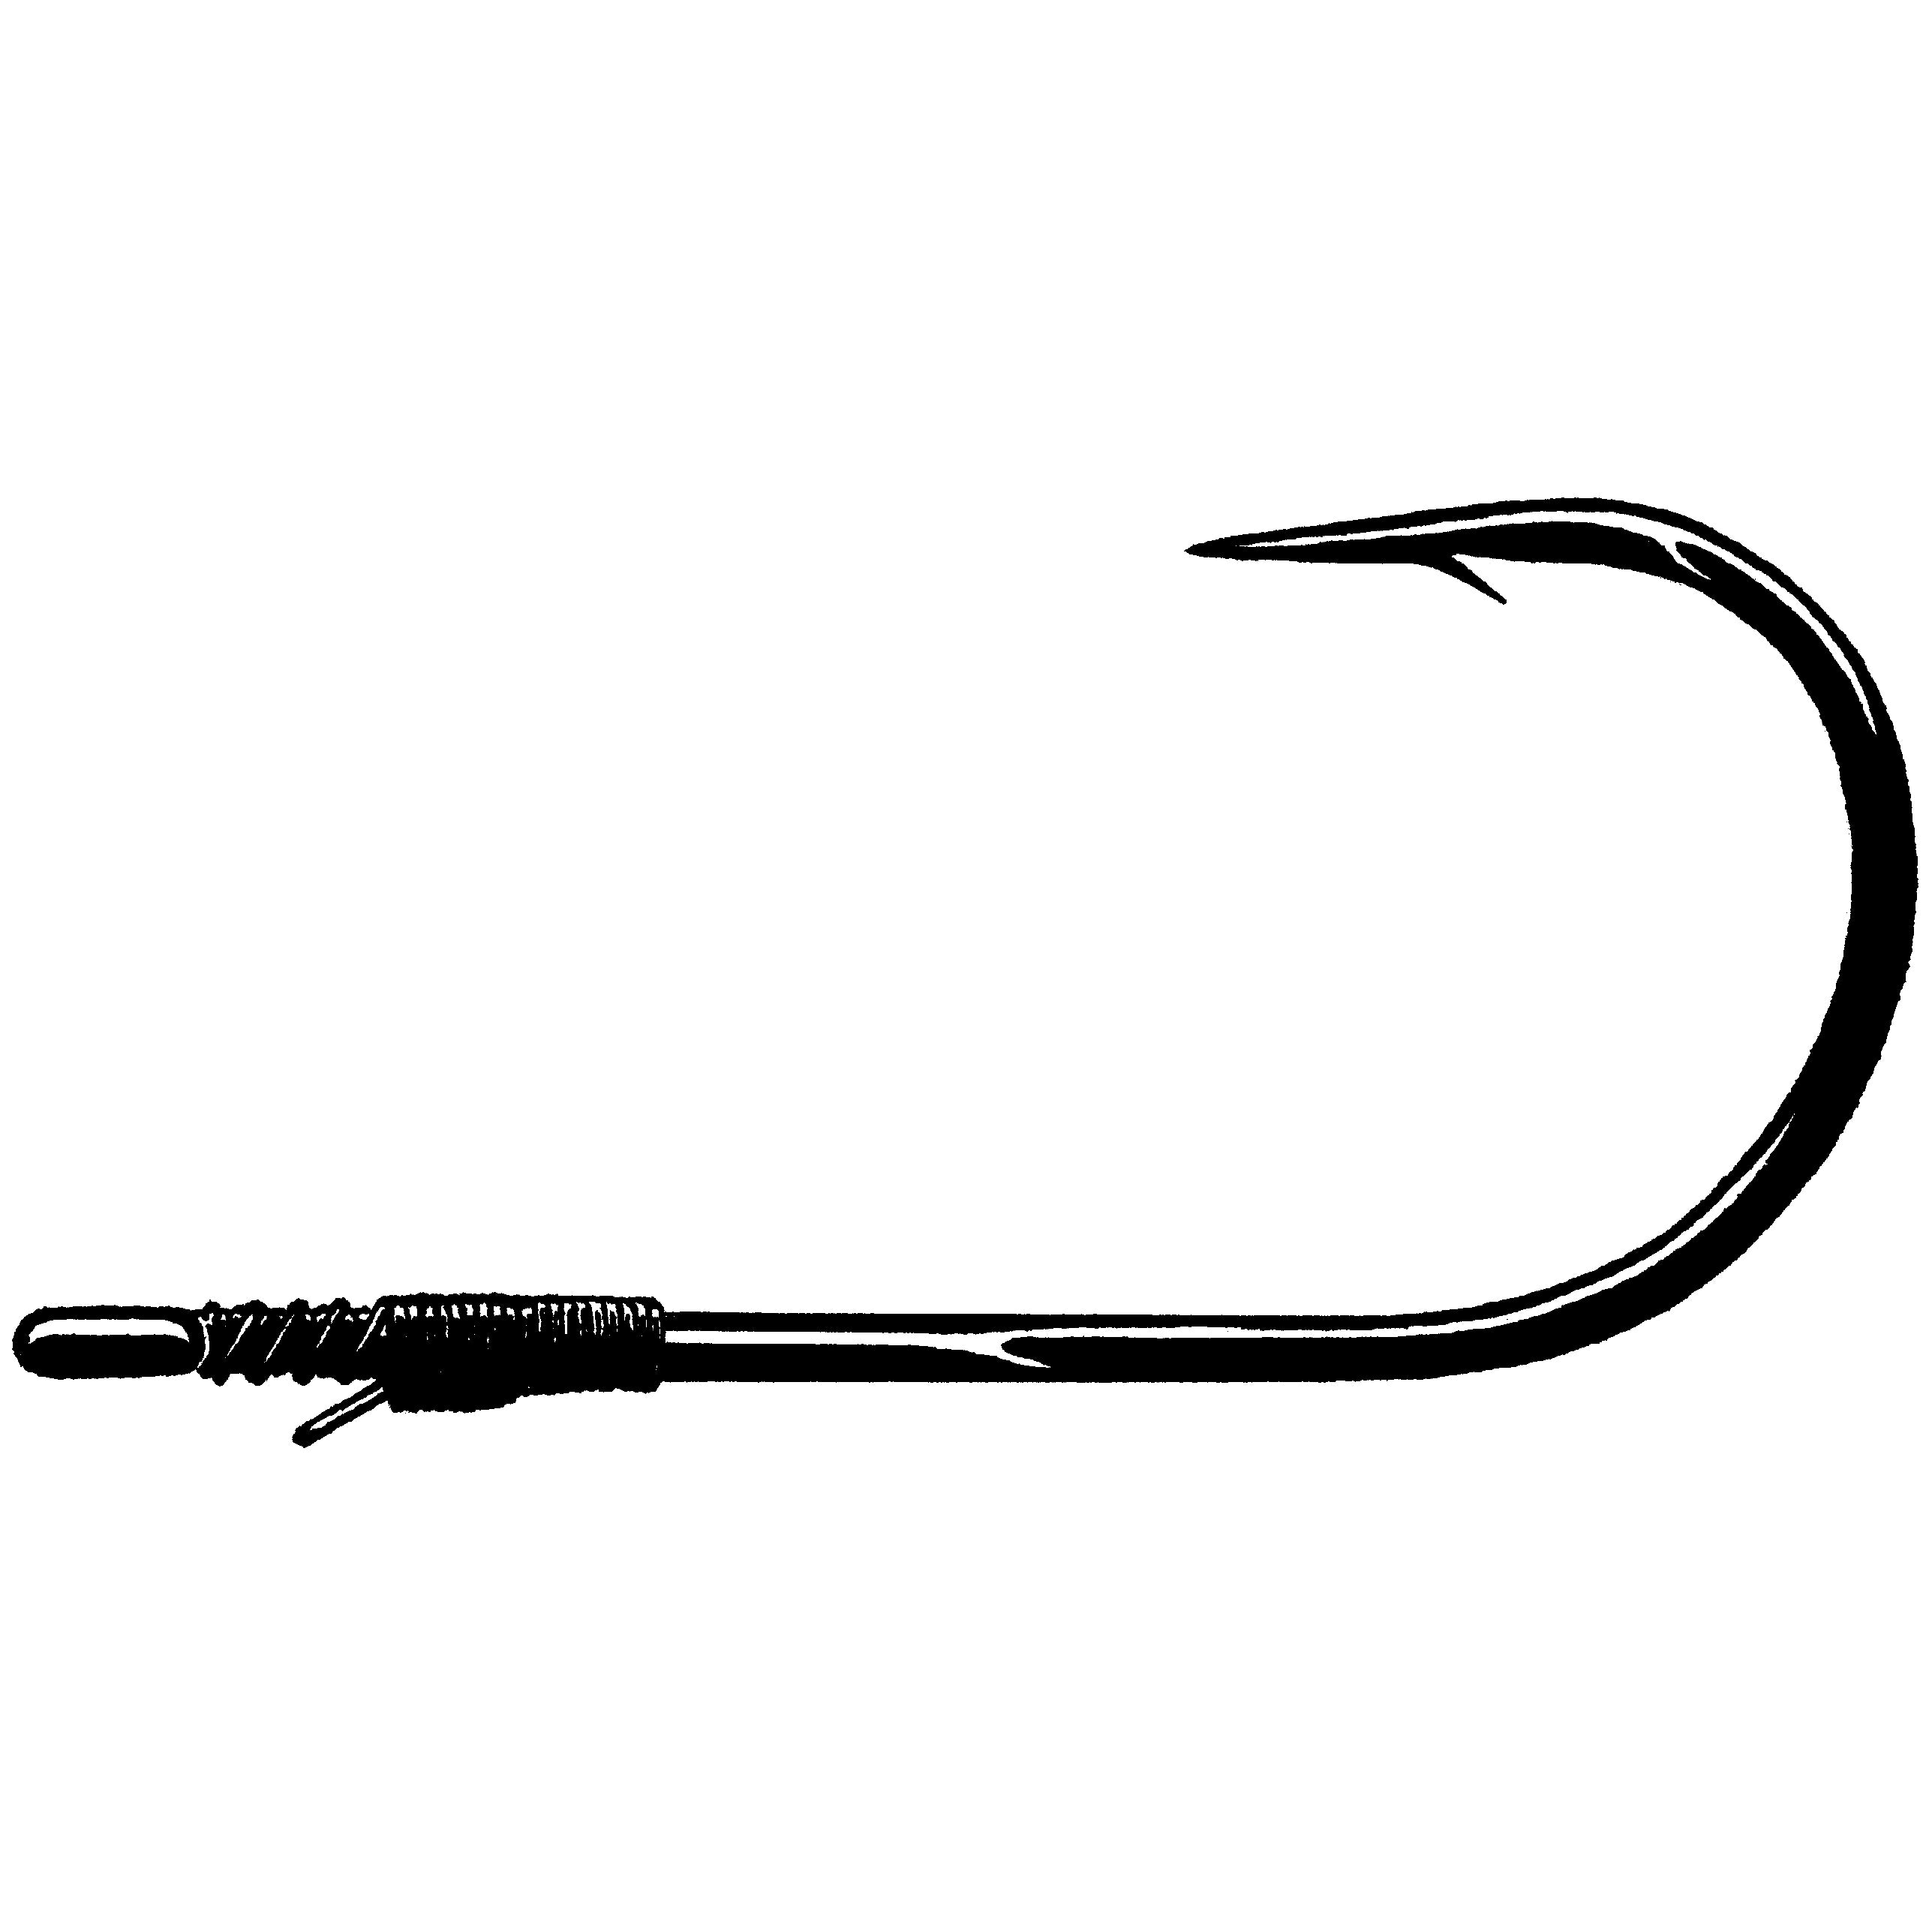 Buy Fishing Supplies Online, Fishing Gear Online, Copperstate Tackle